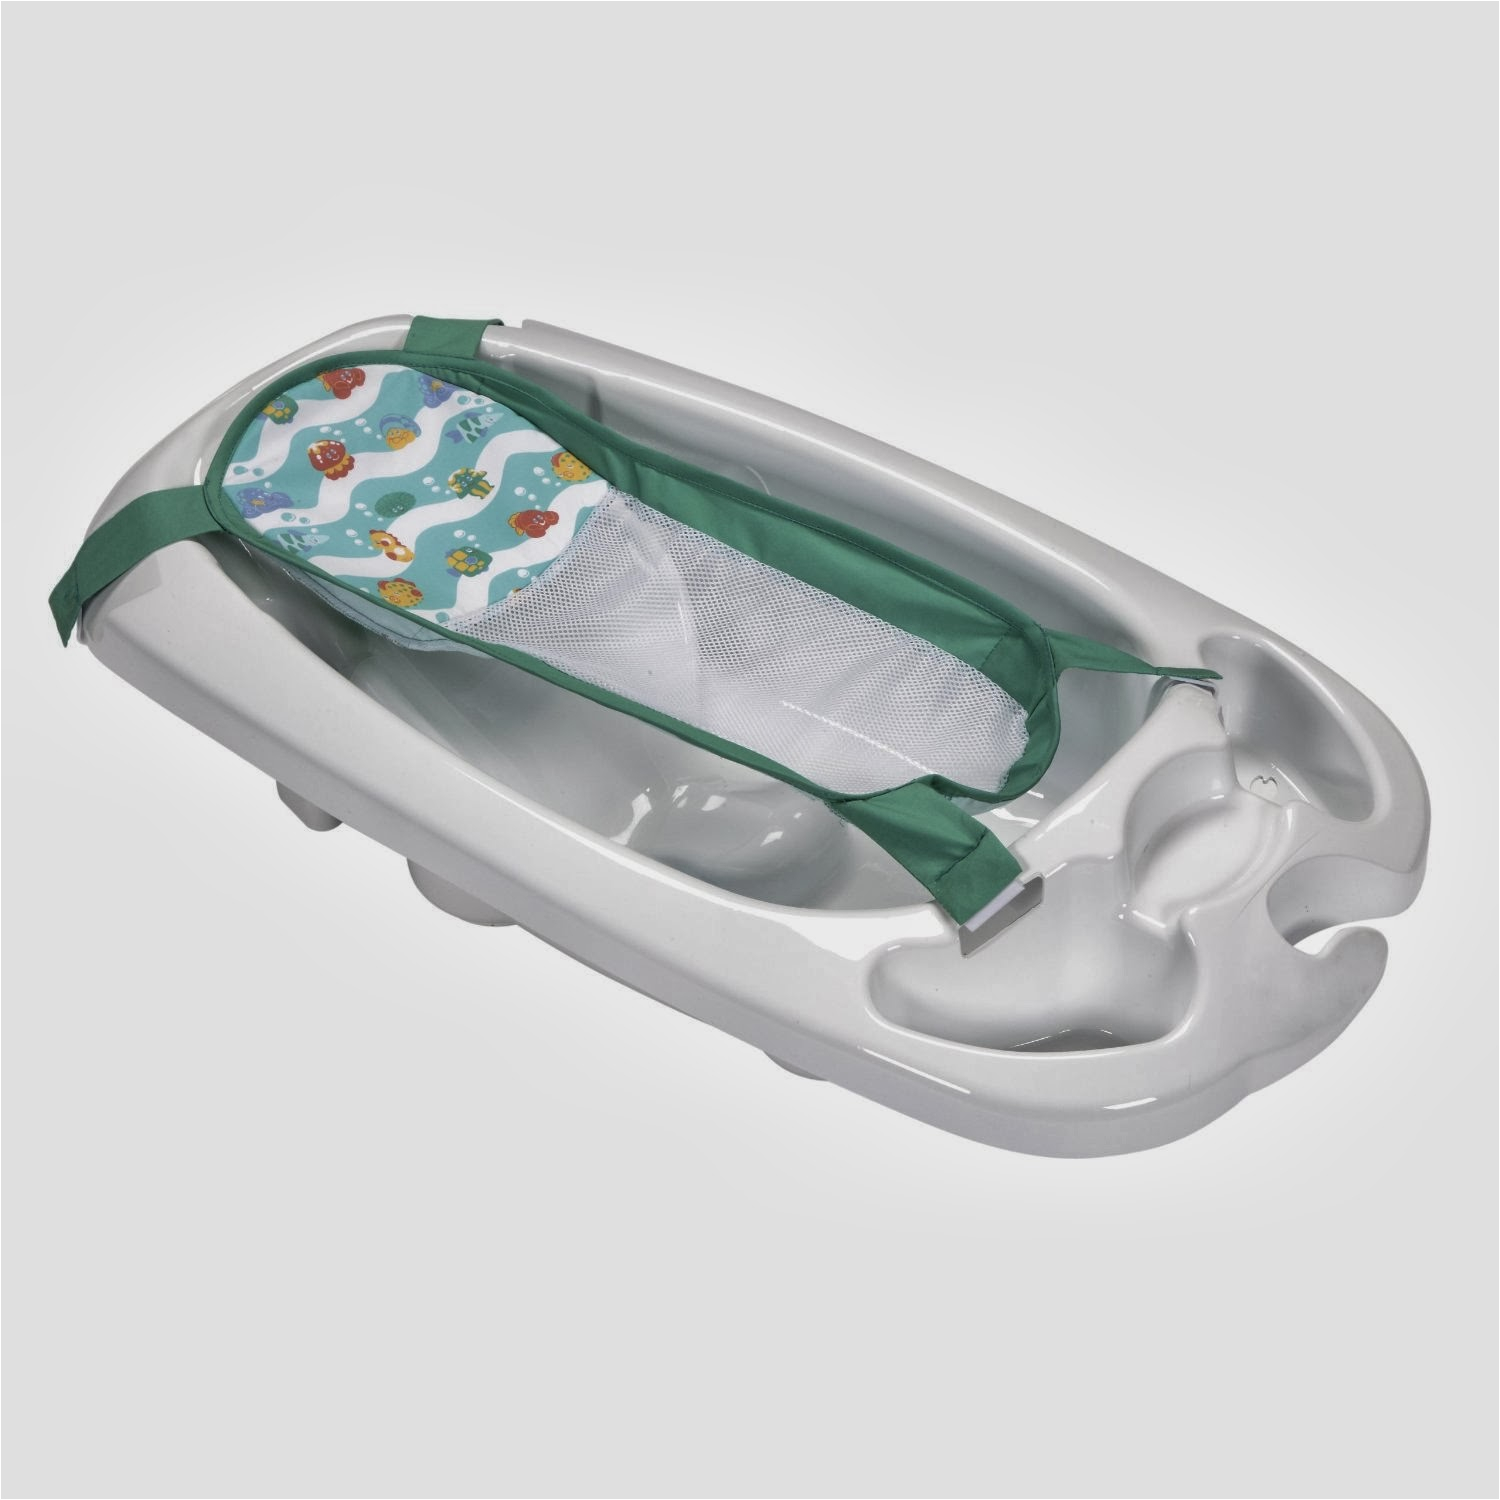 angelcare baby bath seat great ideas